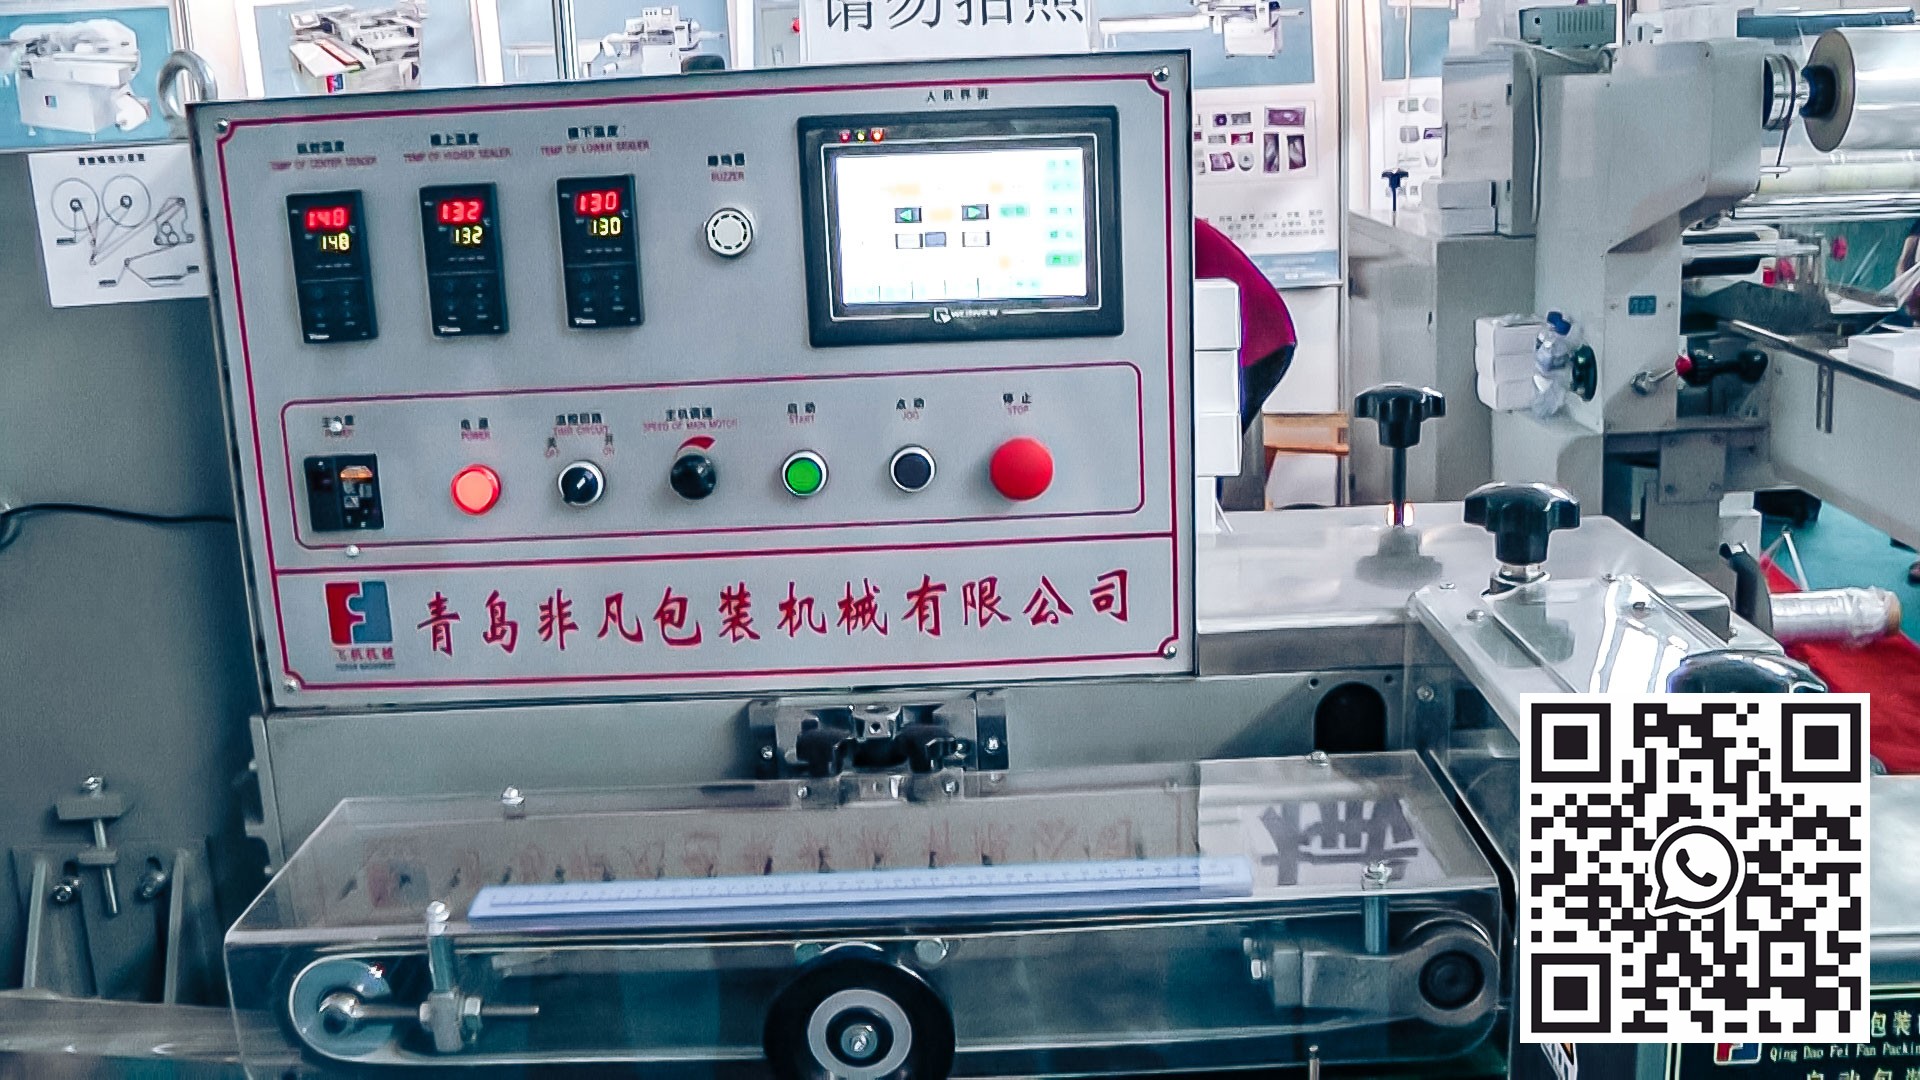 Automatic equipment packing blisters with capsules in cellophane in pharmaceutical production